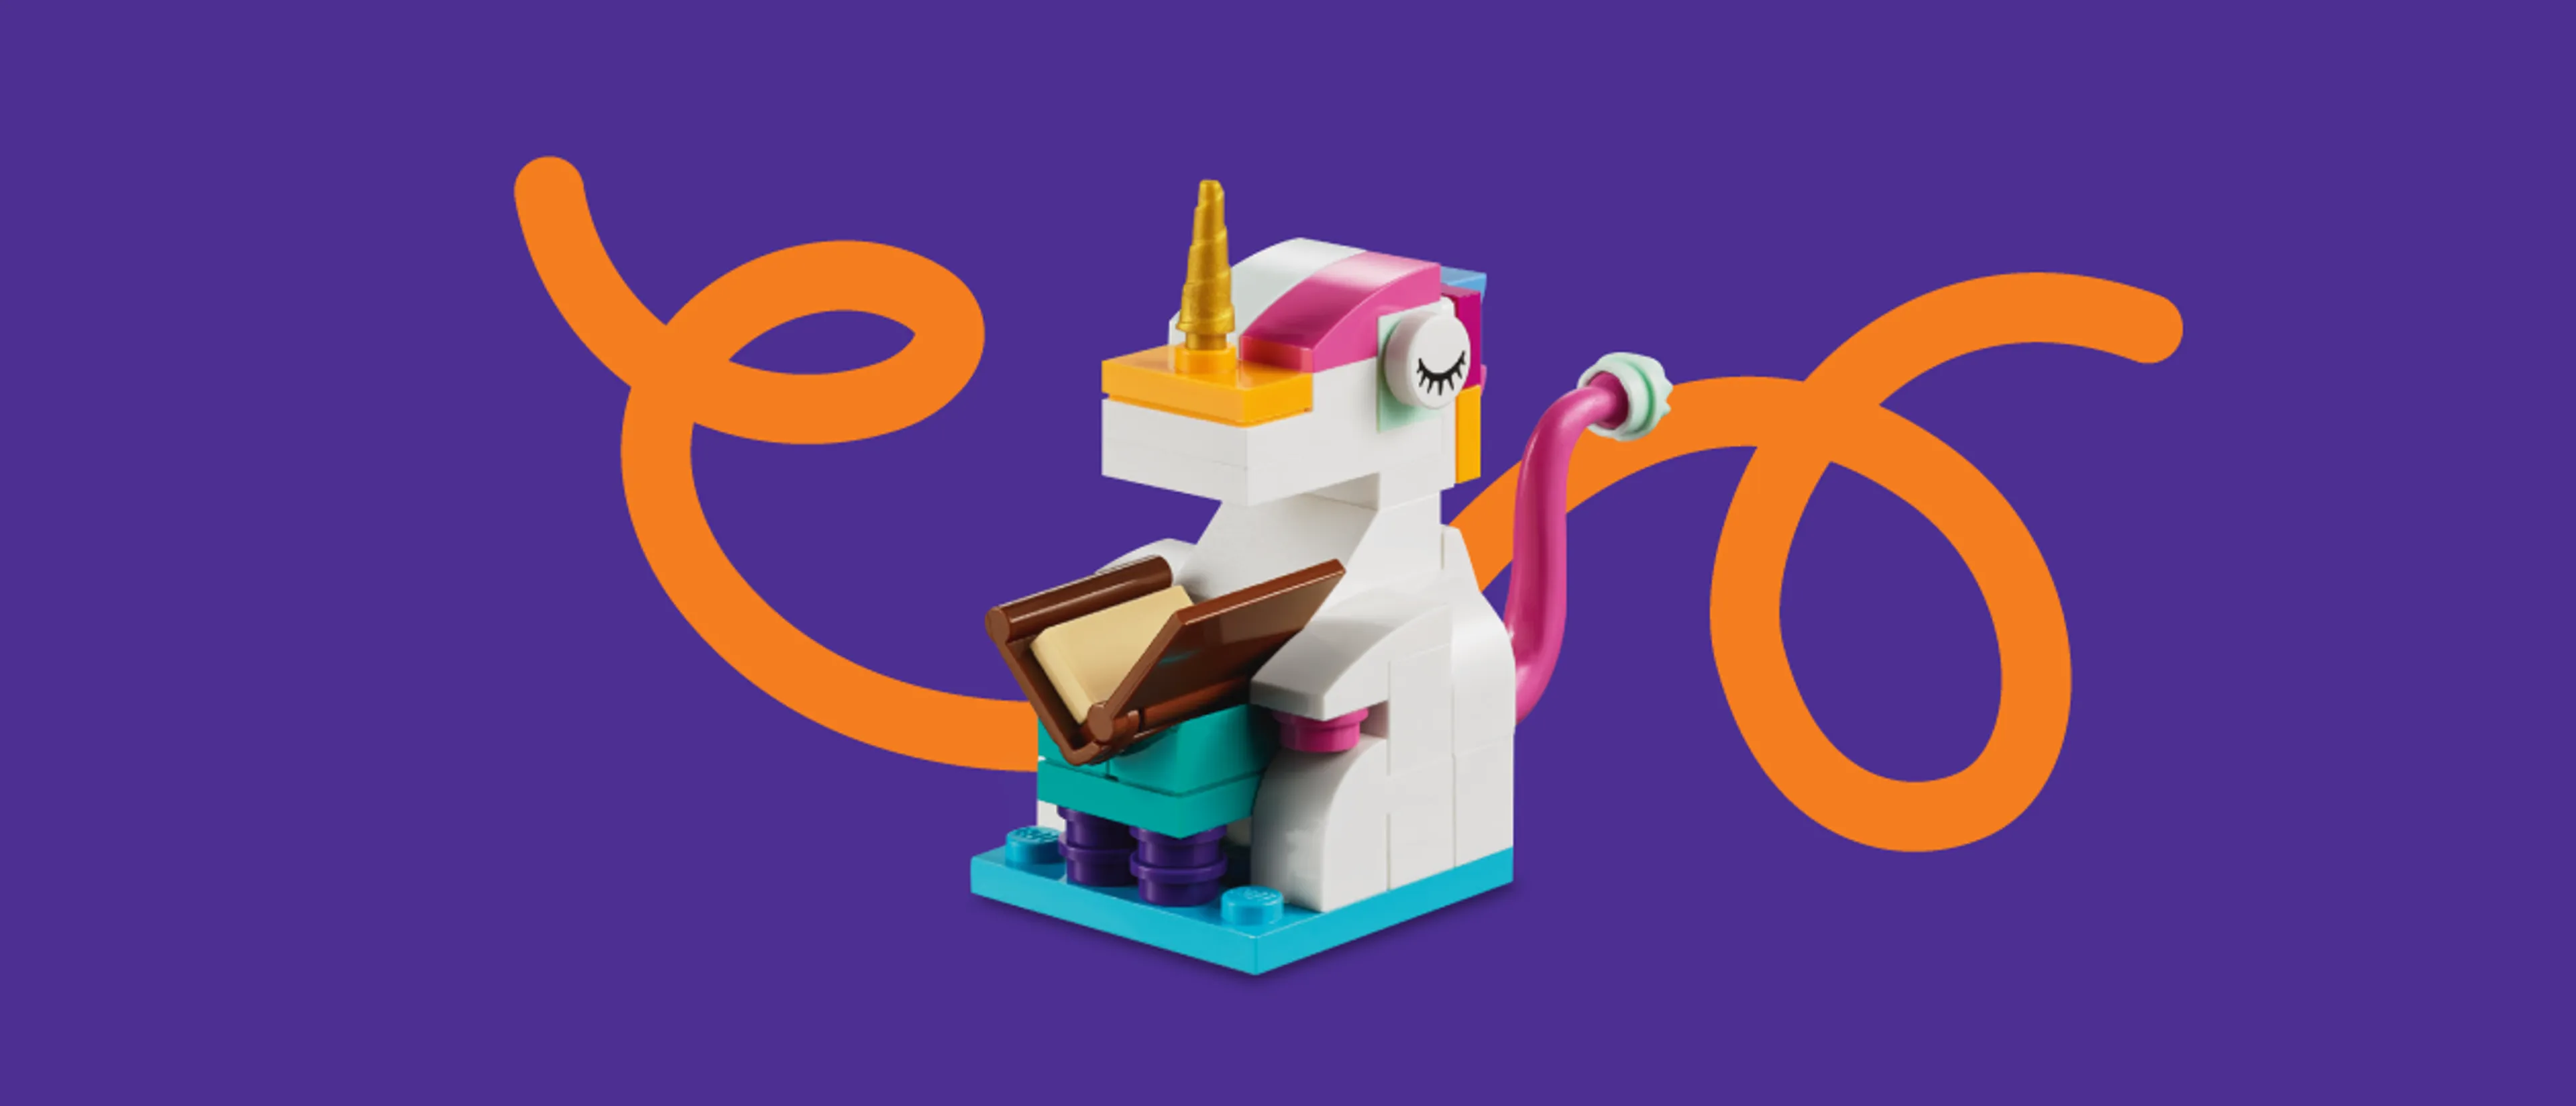 LEGO Unicorn Building Instructions - Frugal Fun For Boys and Girls